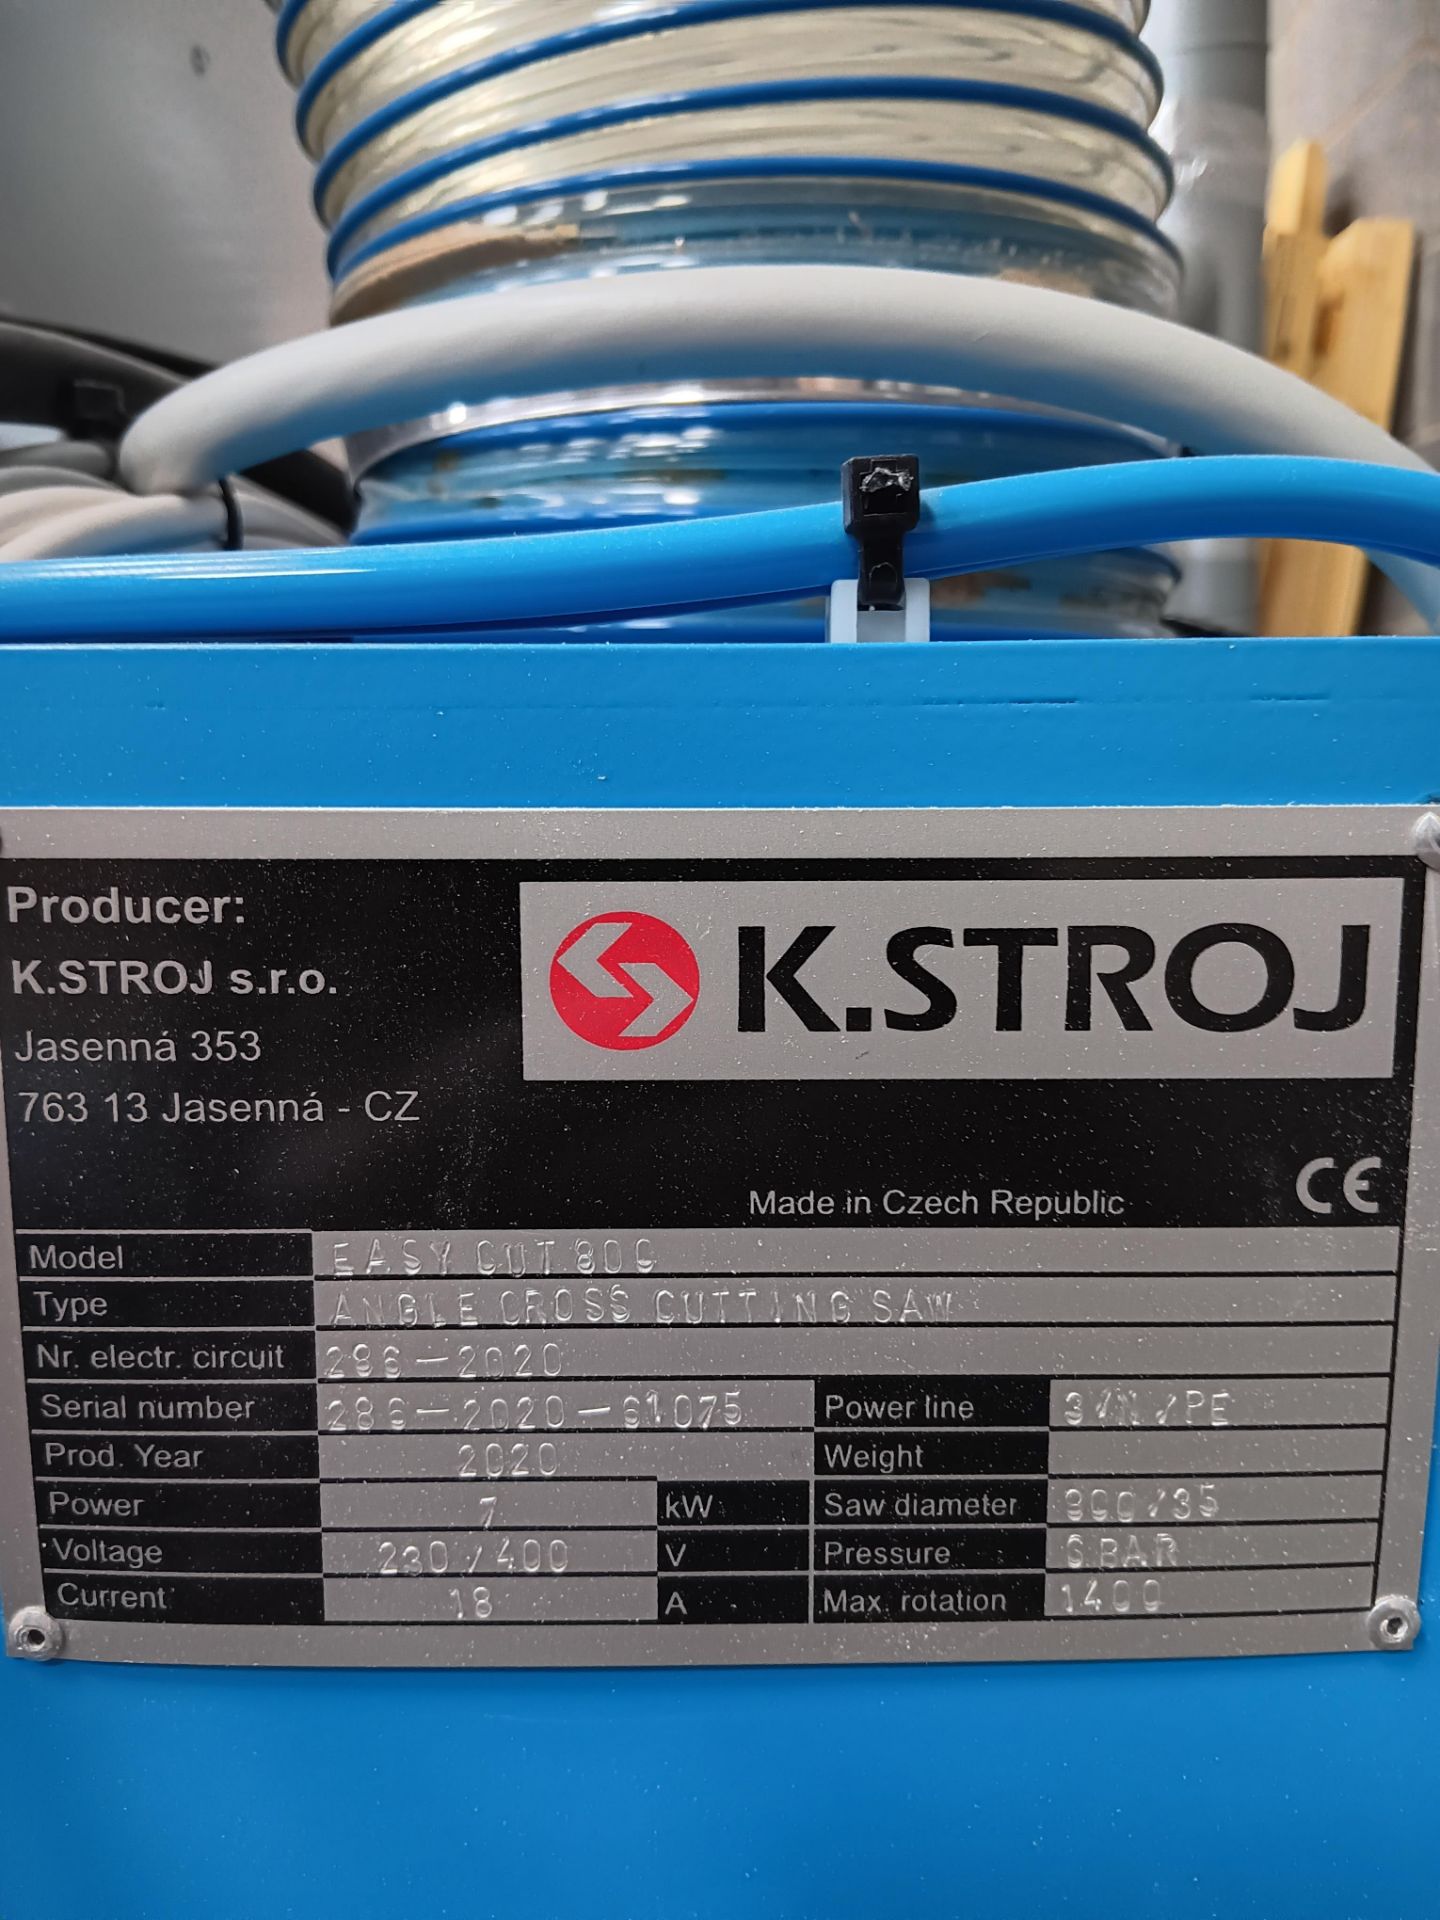 K Stroj Easycut 800 programmable angle cross cut saw Serial number 286-2020-61075 2020 with roller - Image 2 of 4